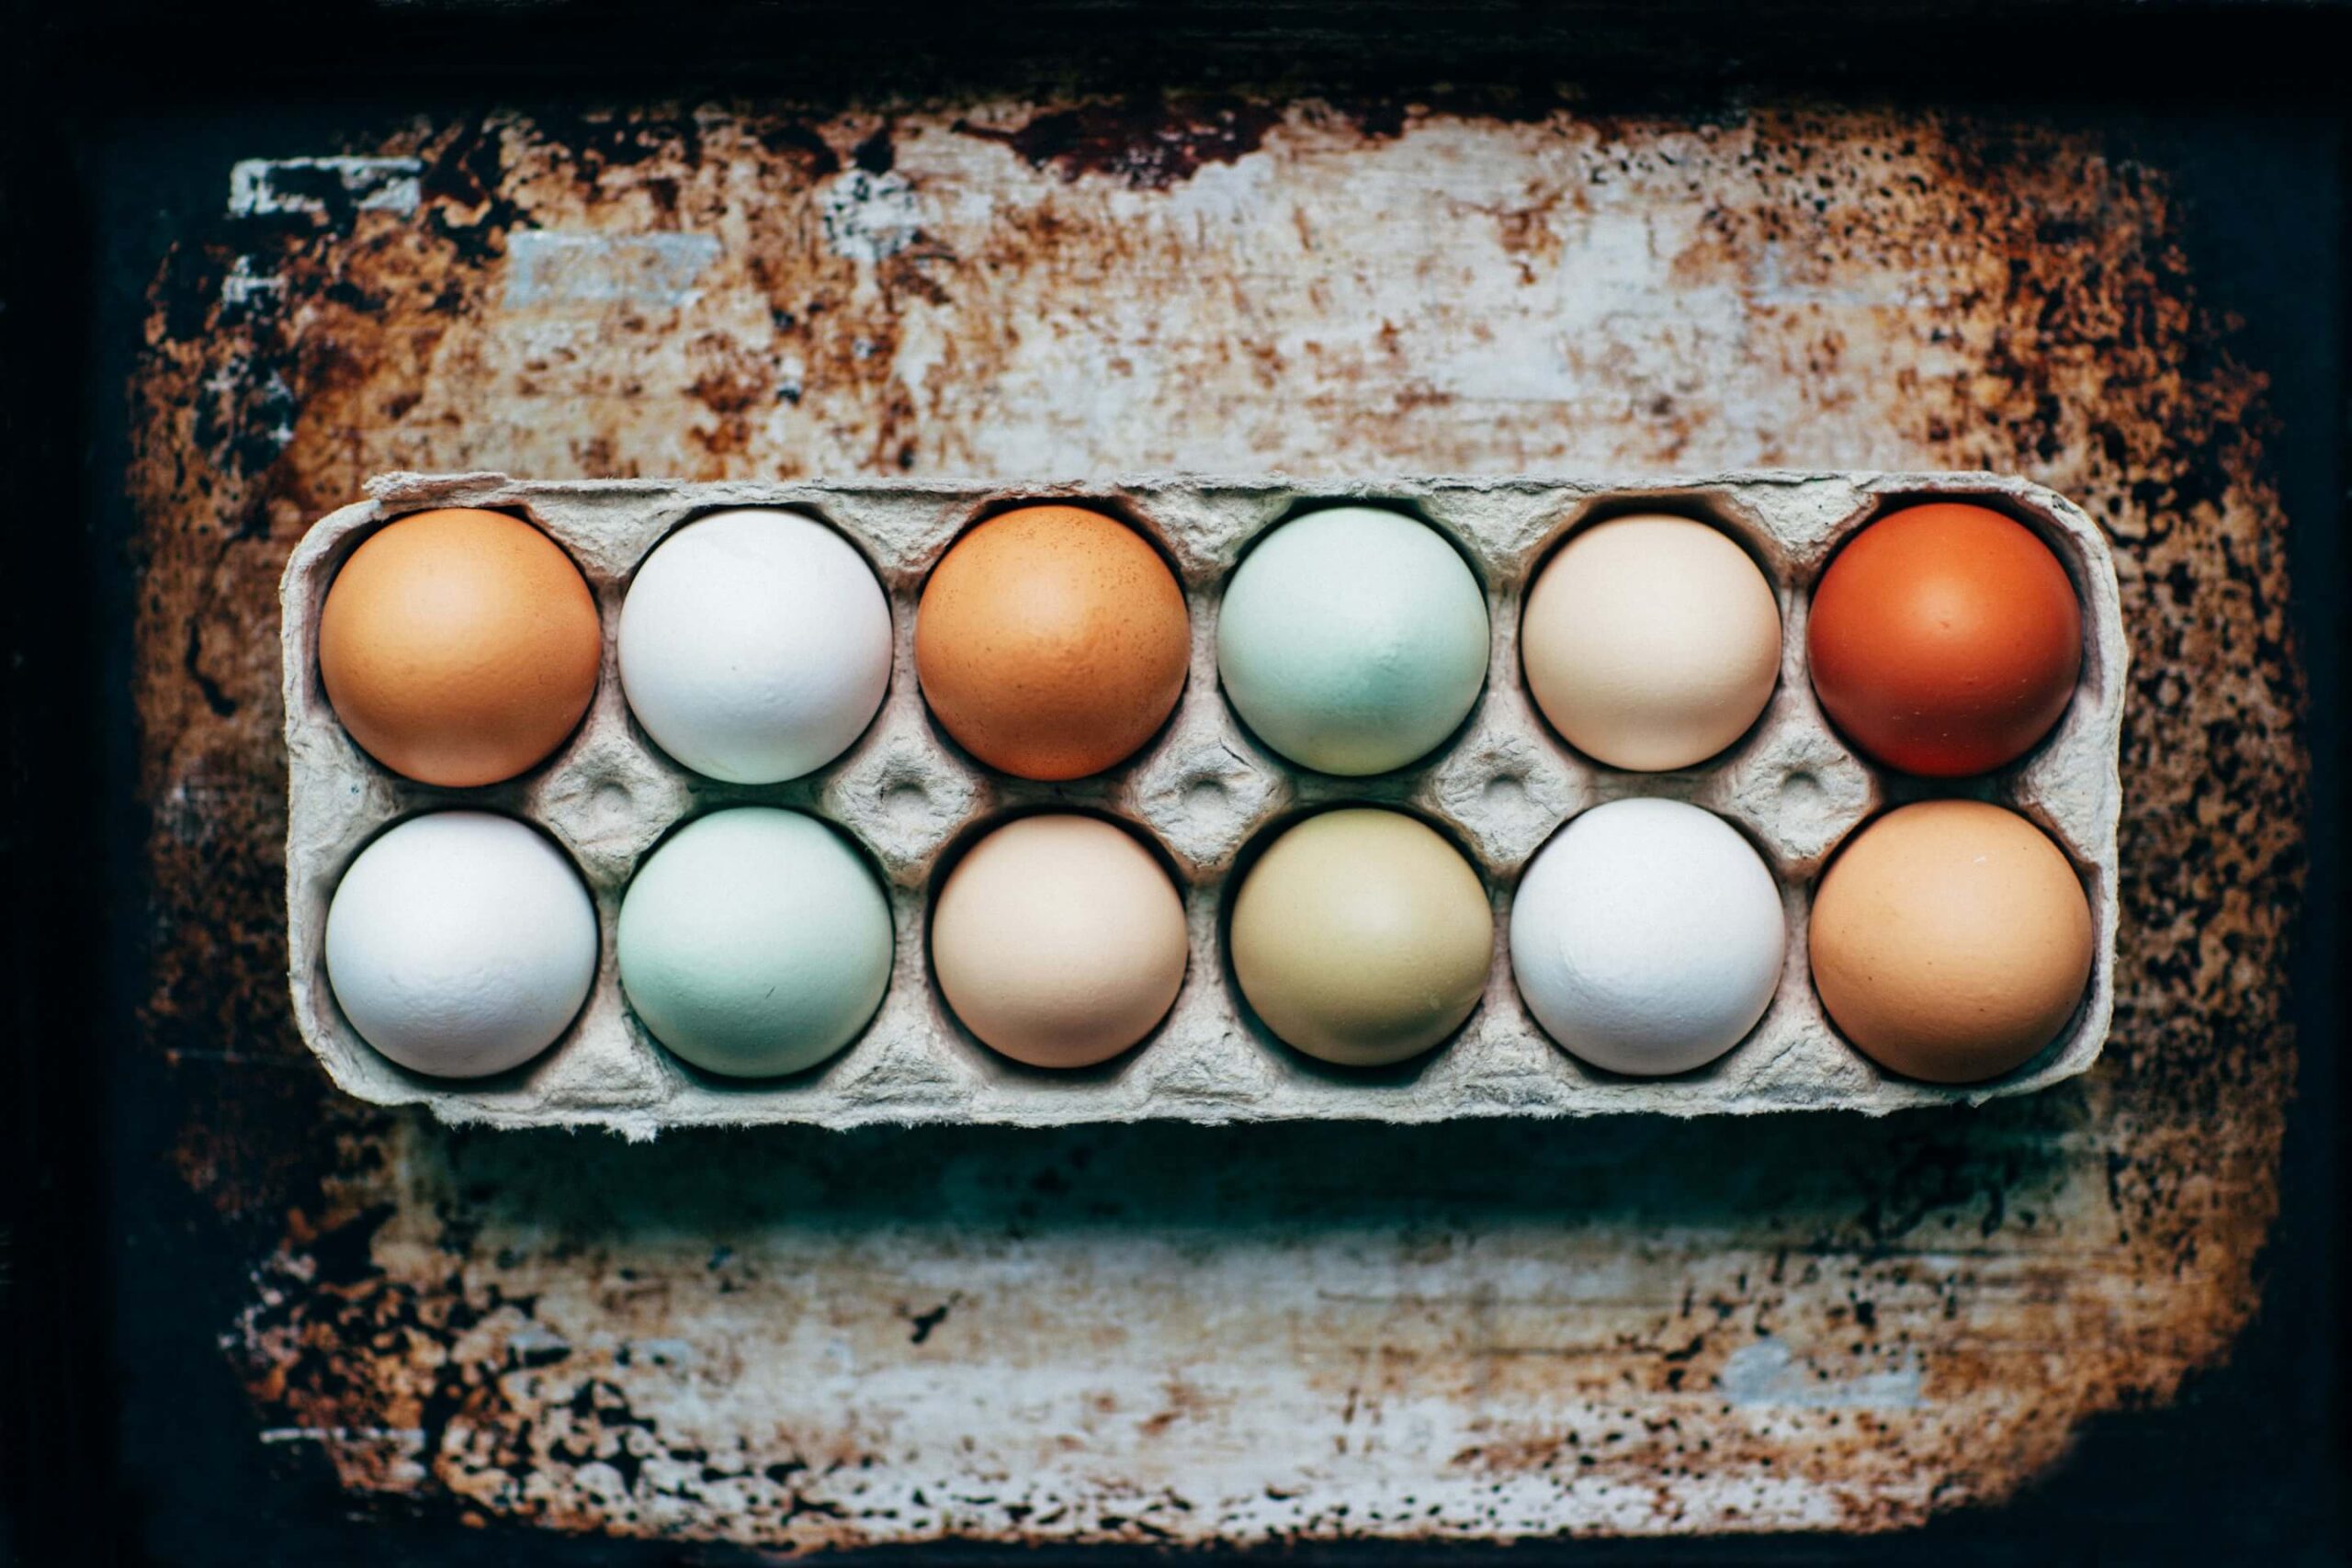 Eggs of various color in a carton